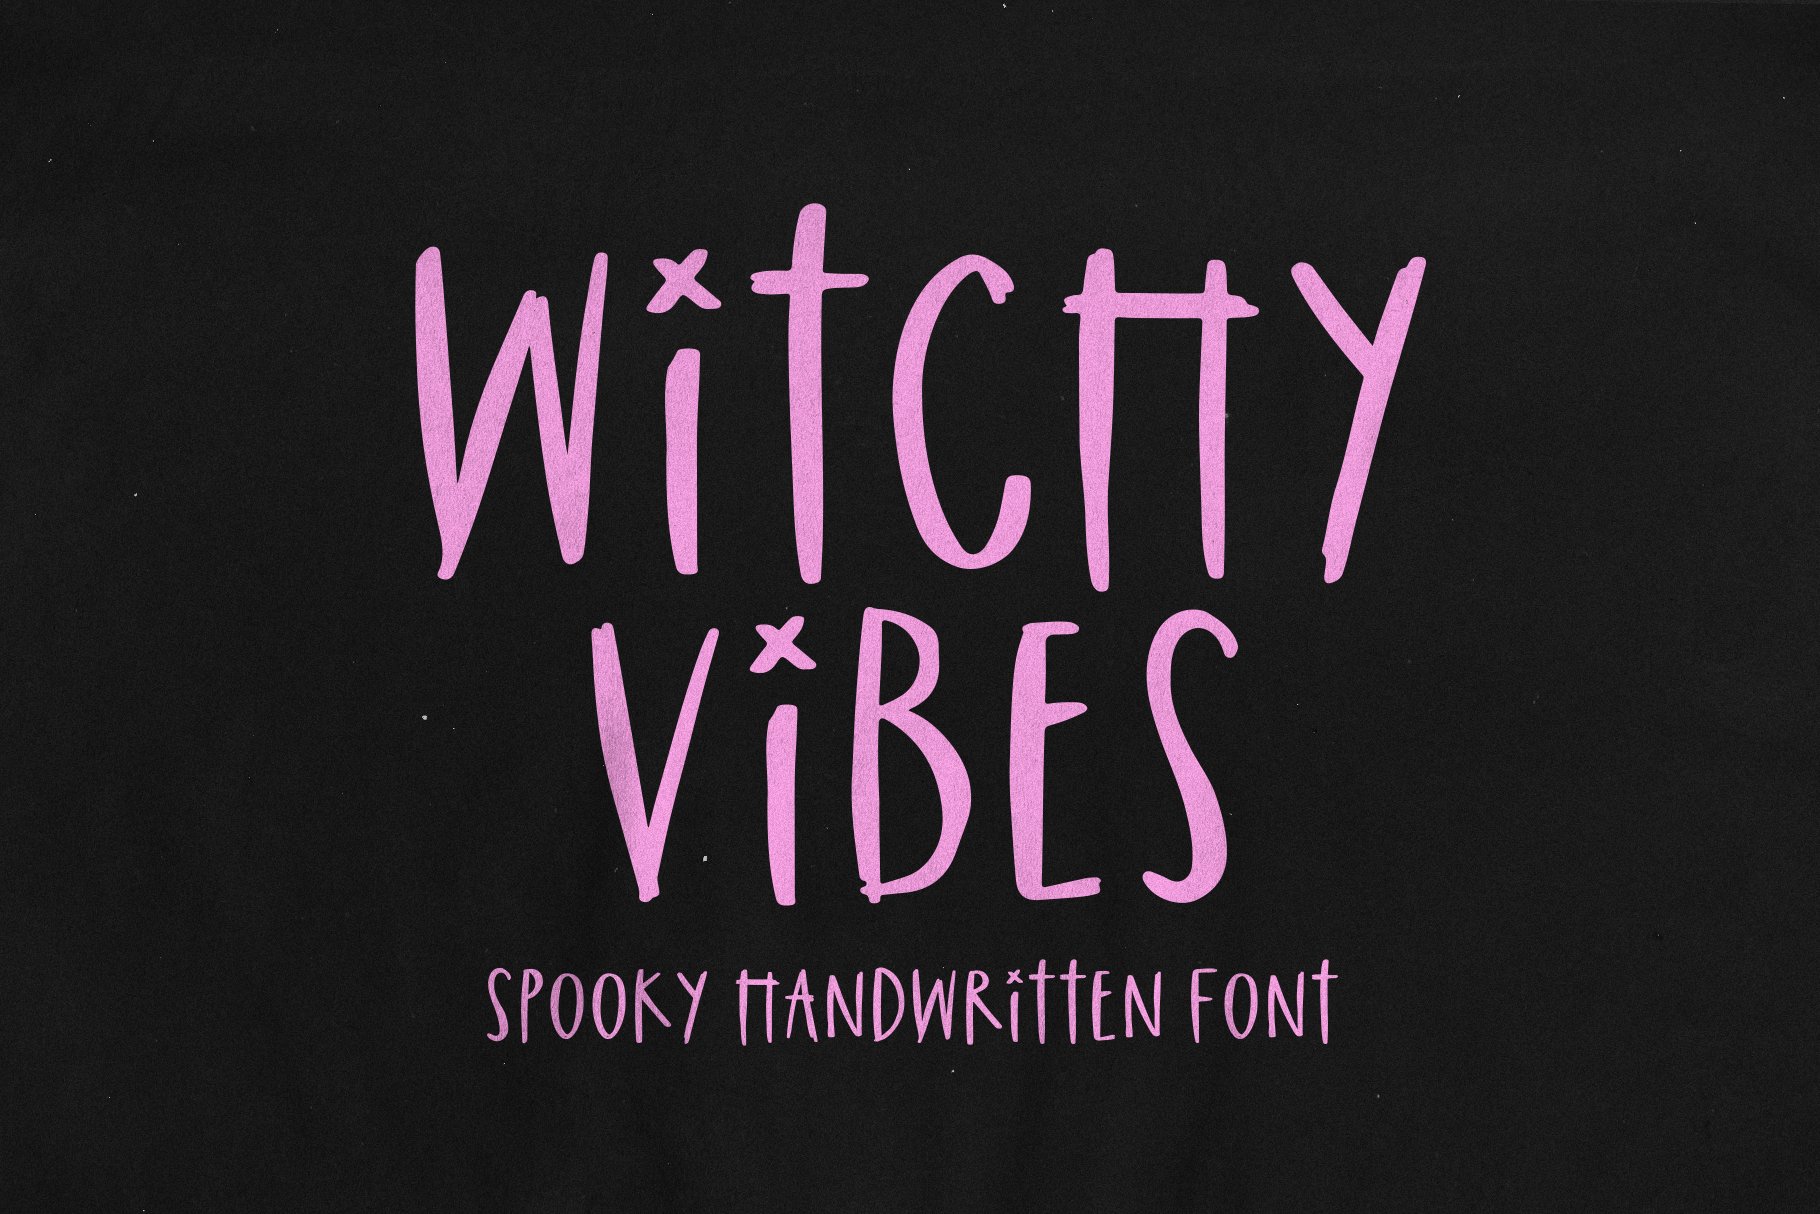 Witchy Vibes | Spooky Halloween Font cover image.